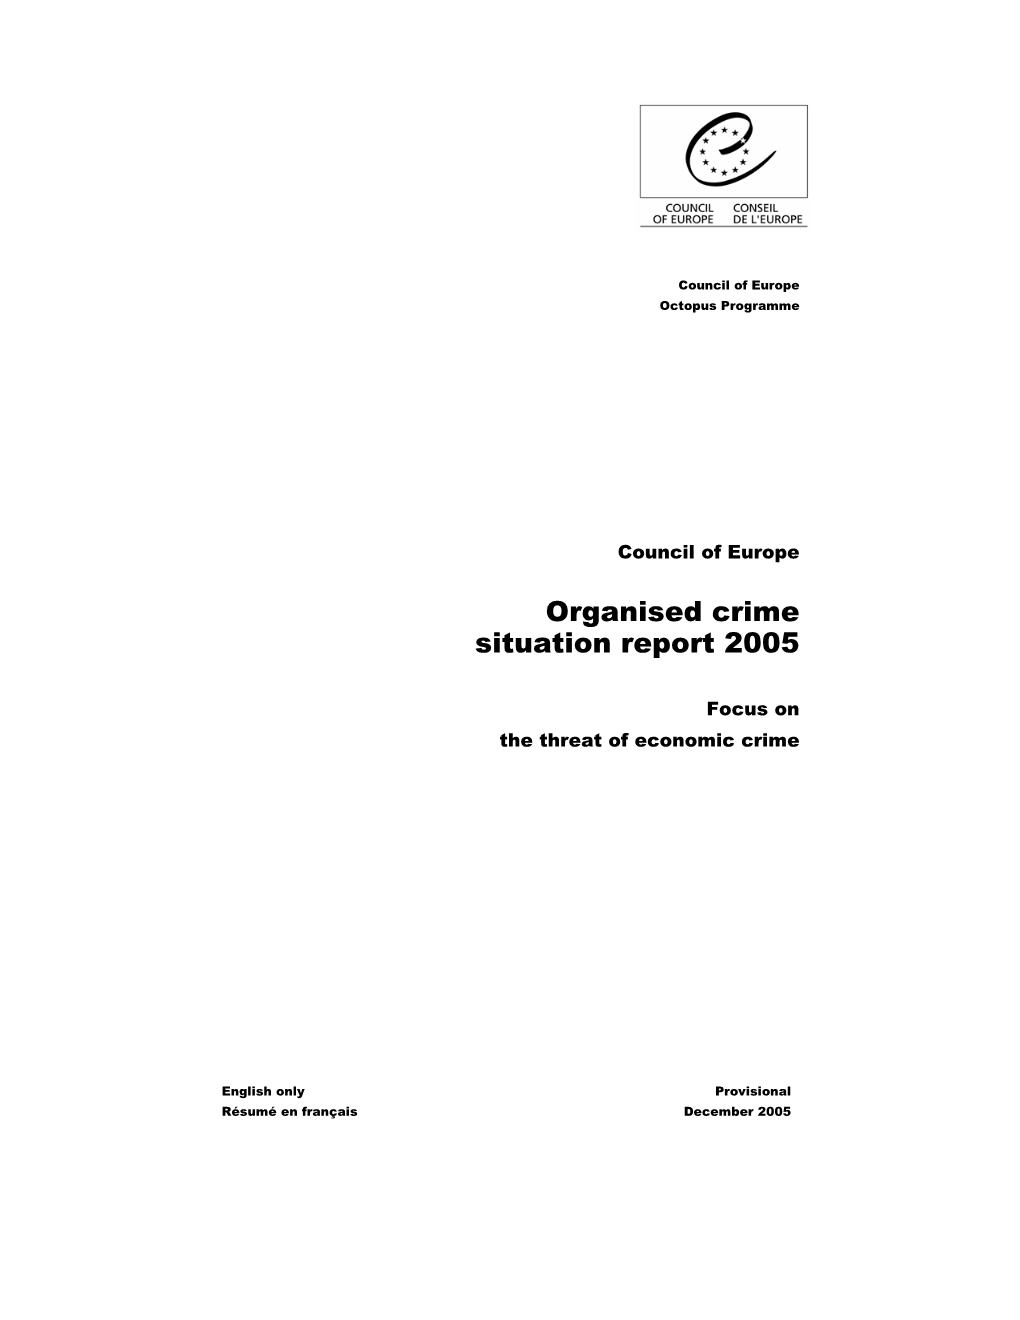 Organised Crime Situation Report 2005